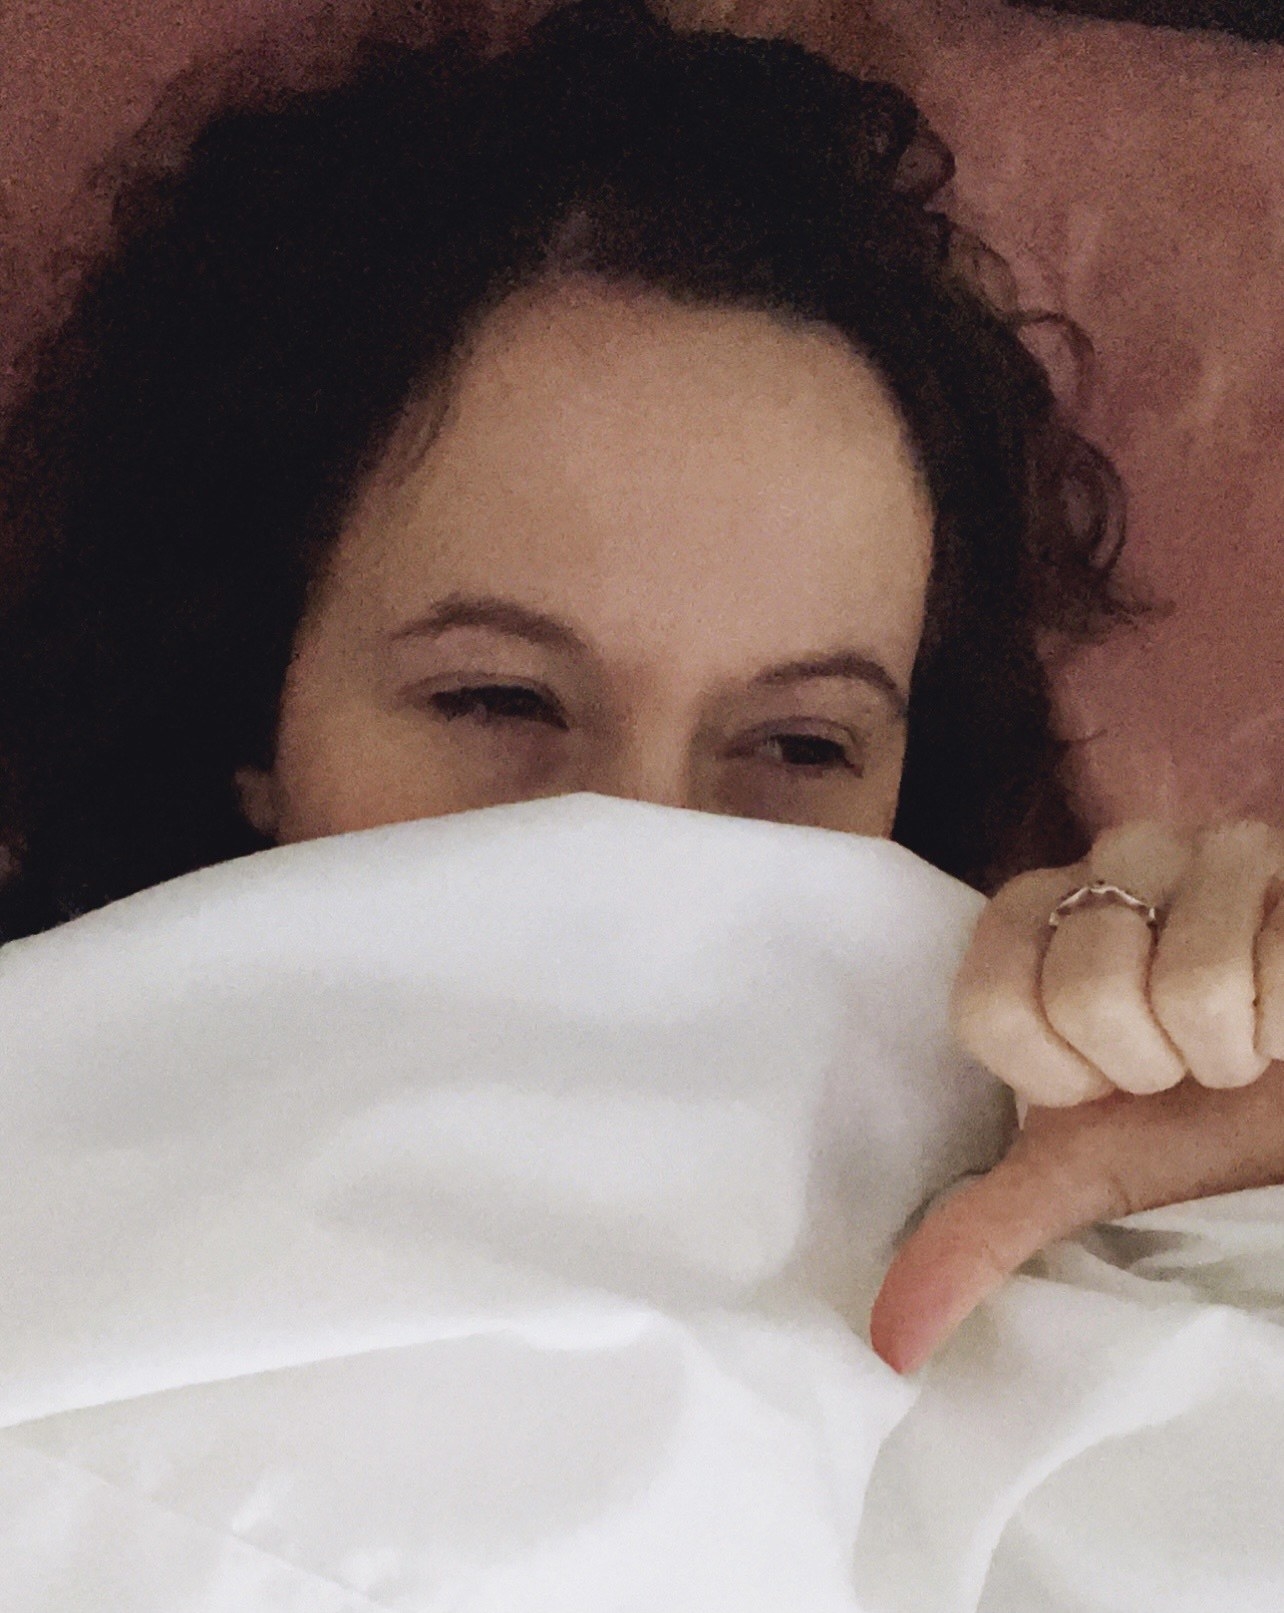 Person in bed with a thumbs-down